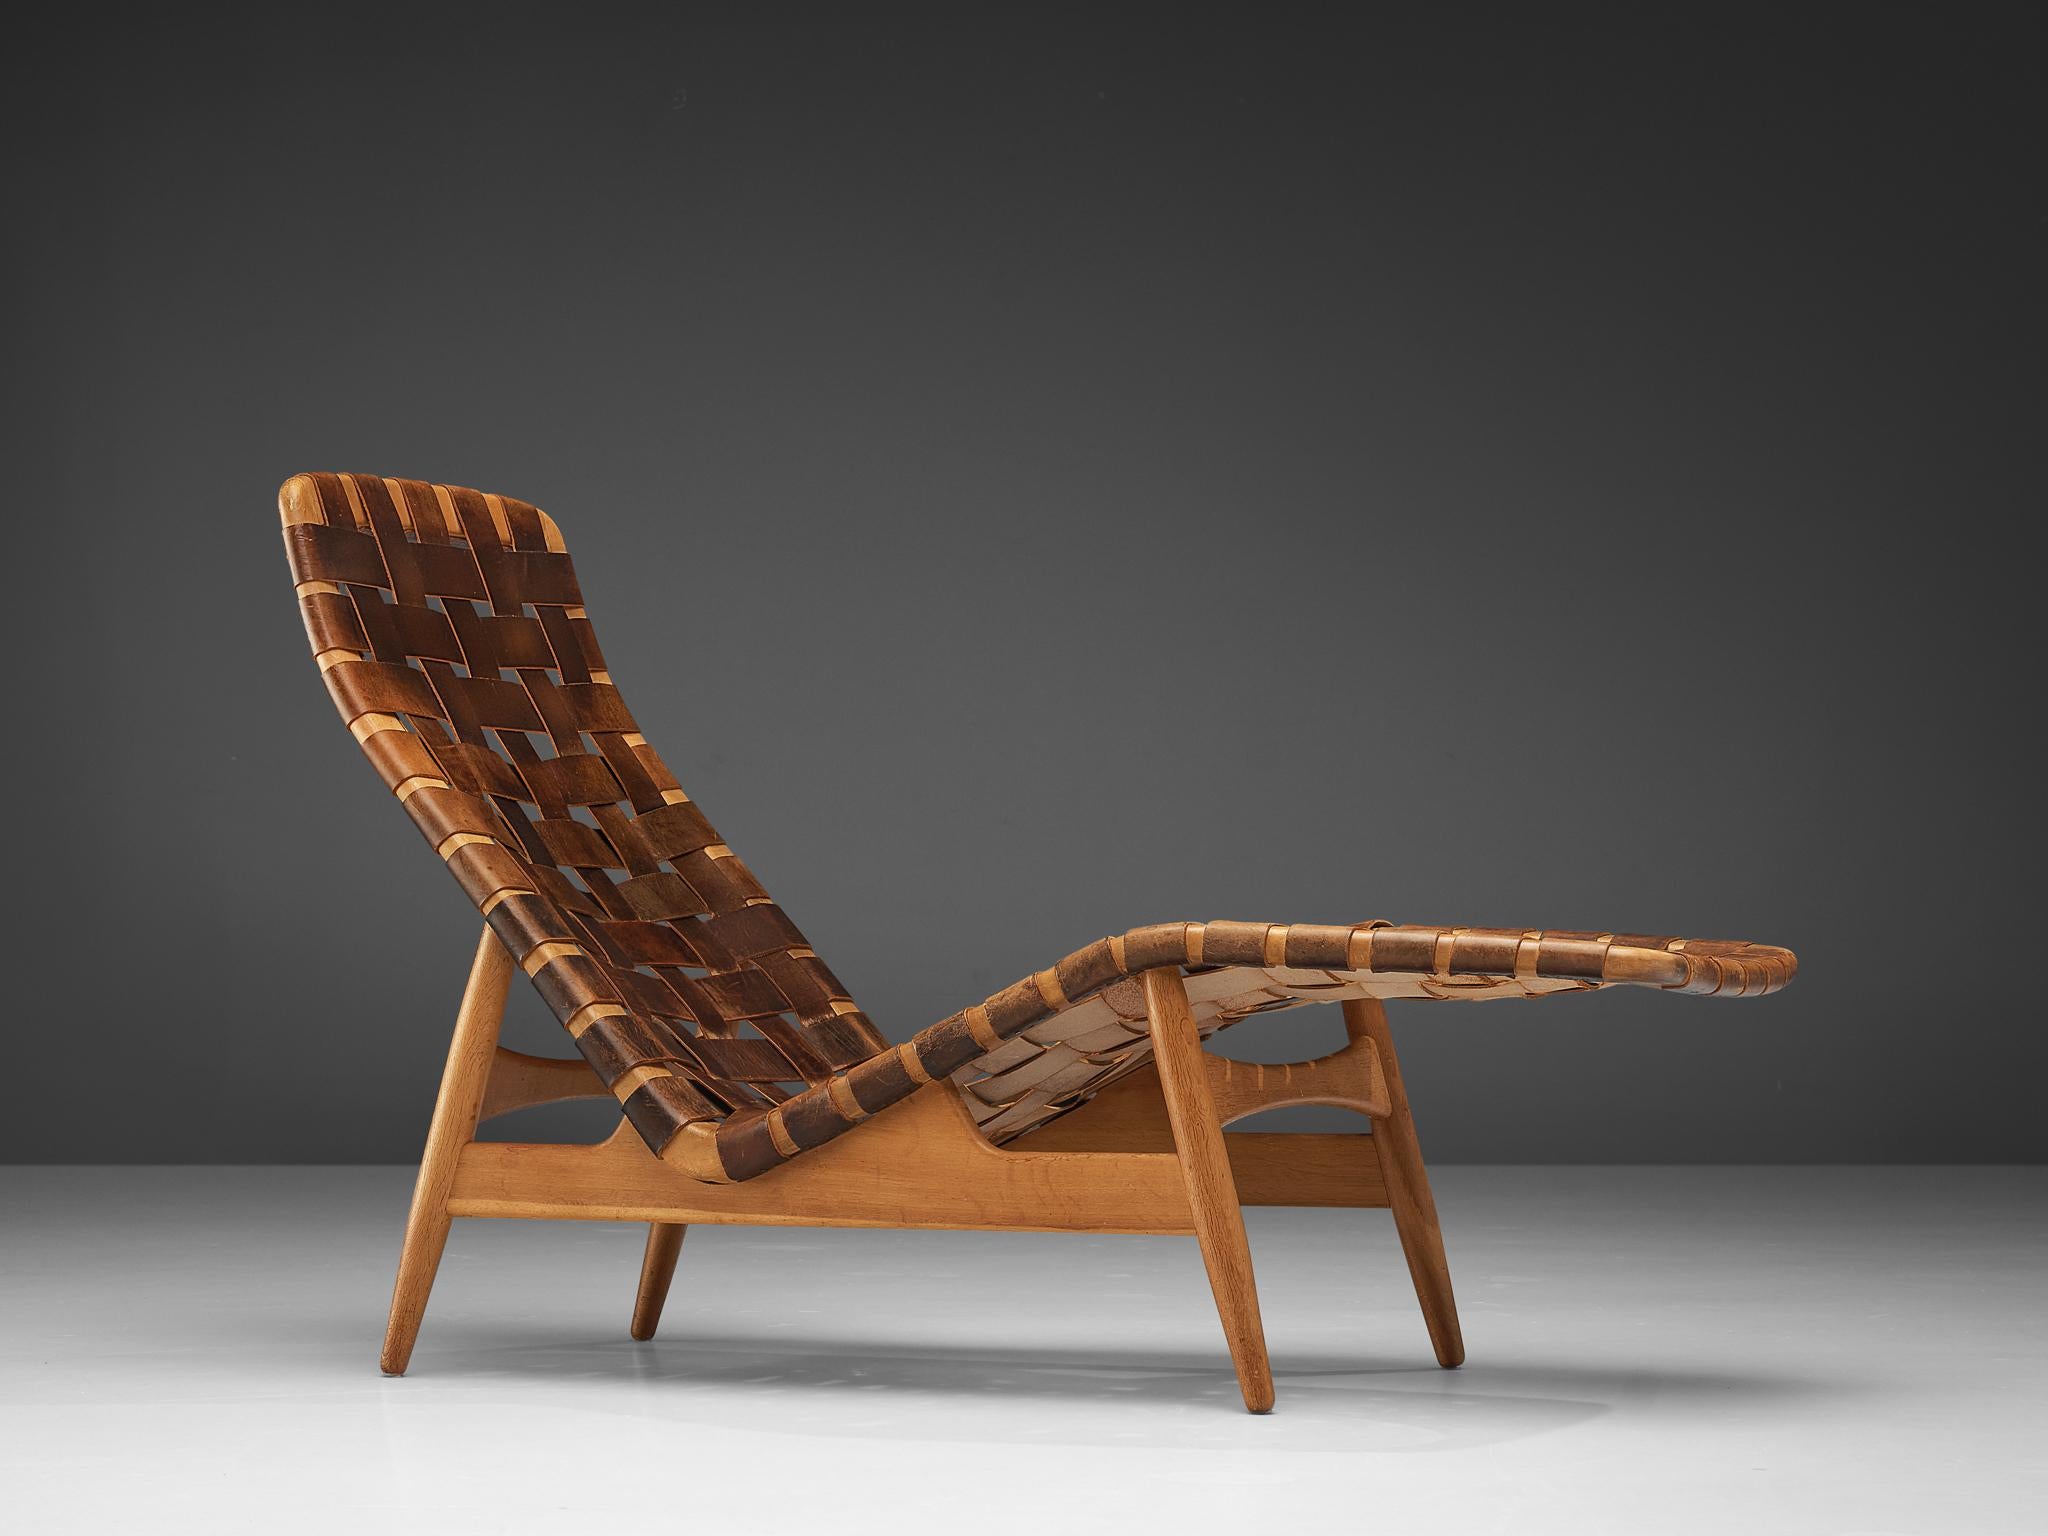 Arne Vodder for Bovirke, chaise longue, leather, oak, Denmark, 1950s.

Chaise longue designed by Arne Vodder for Bovirke in the 1950s. This chaise longue has an open frame in oak wood and a seating created of braided leather straps. The flowing